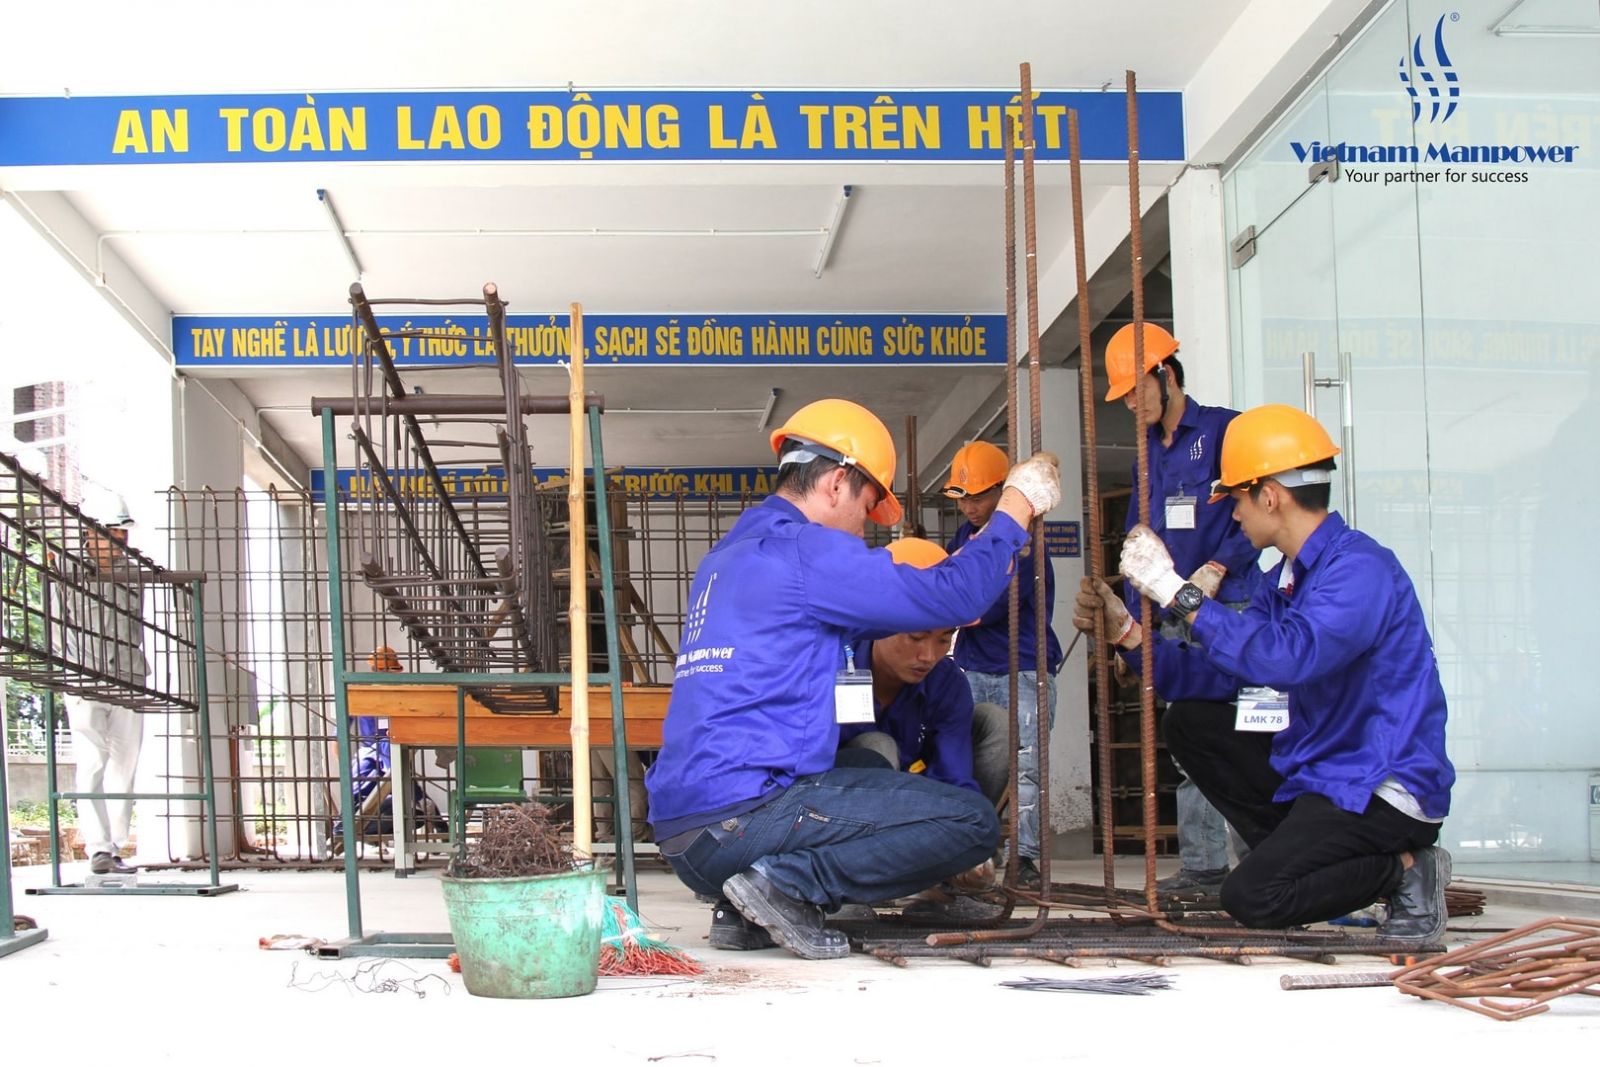 The second cooperation between Vietnam Manpower-LMK Vietnam., JSC and COLO CONSTRUCTION SRL in Romania.